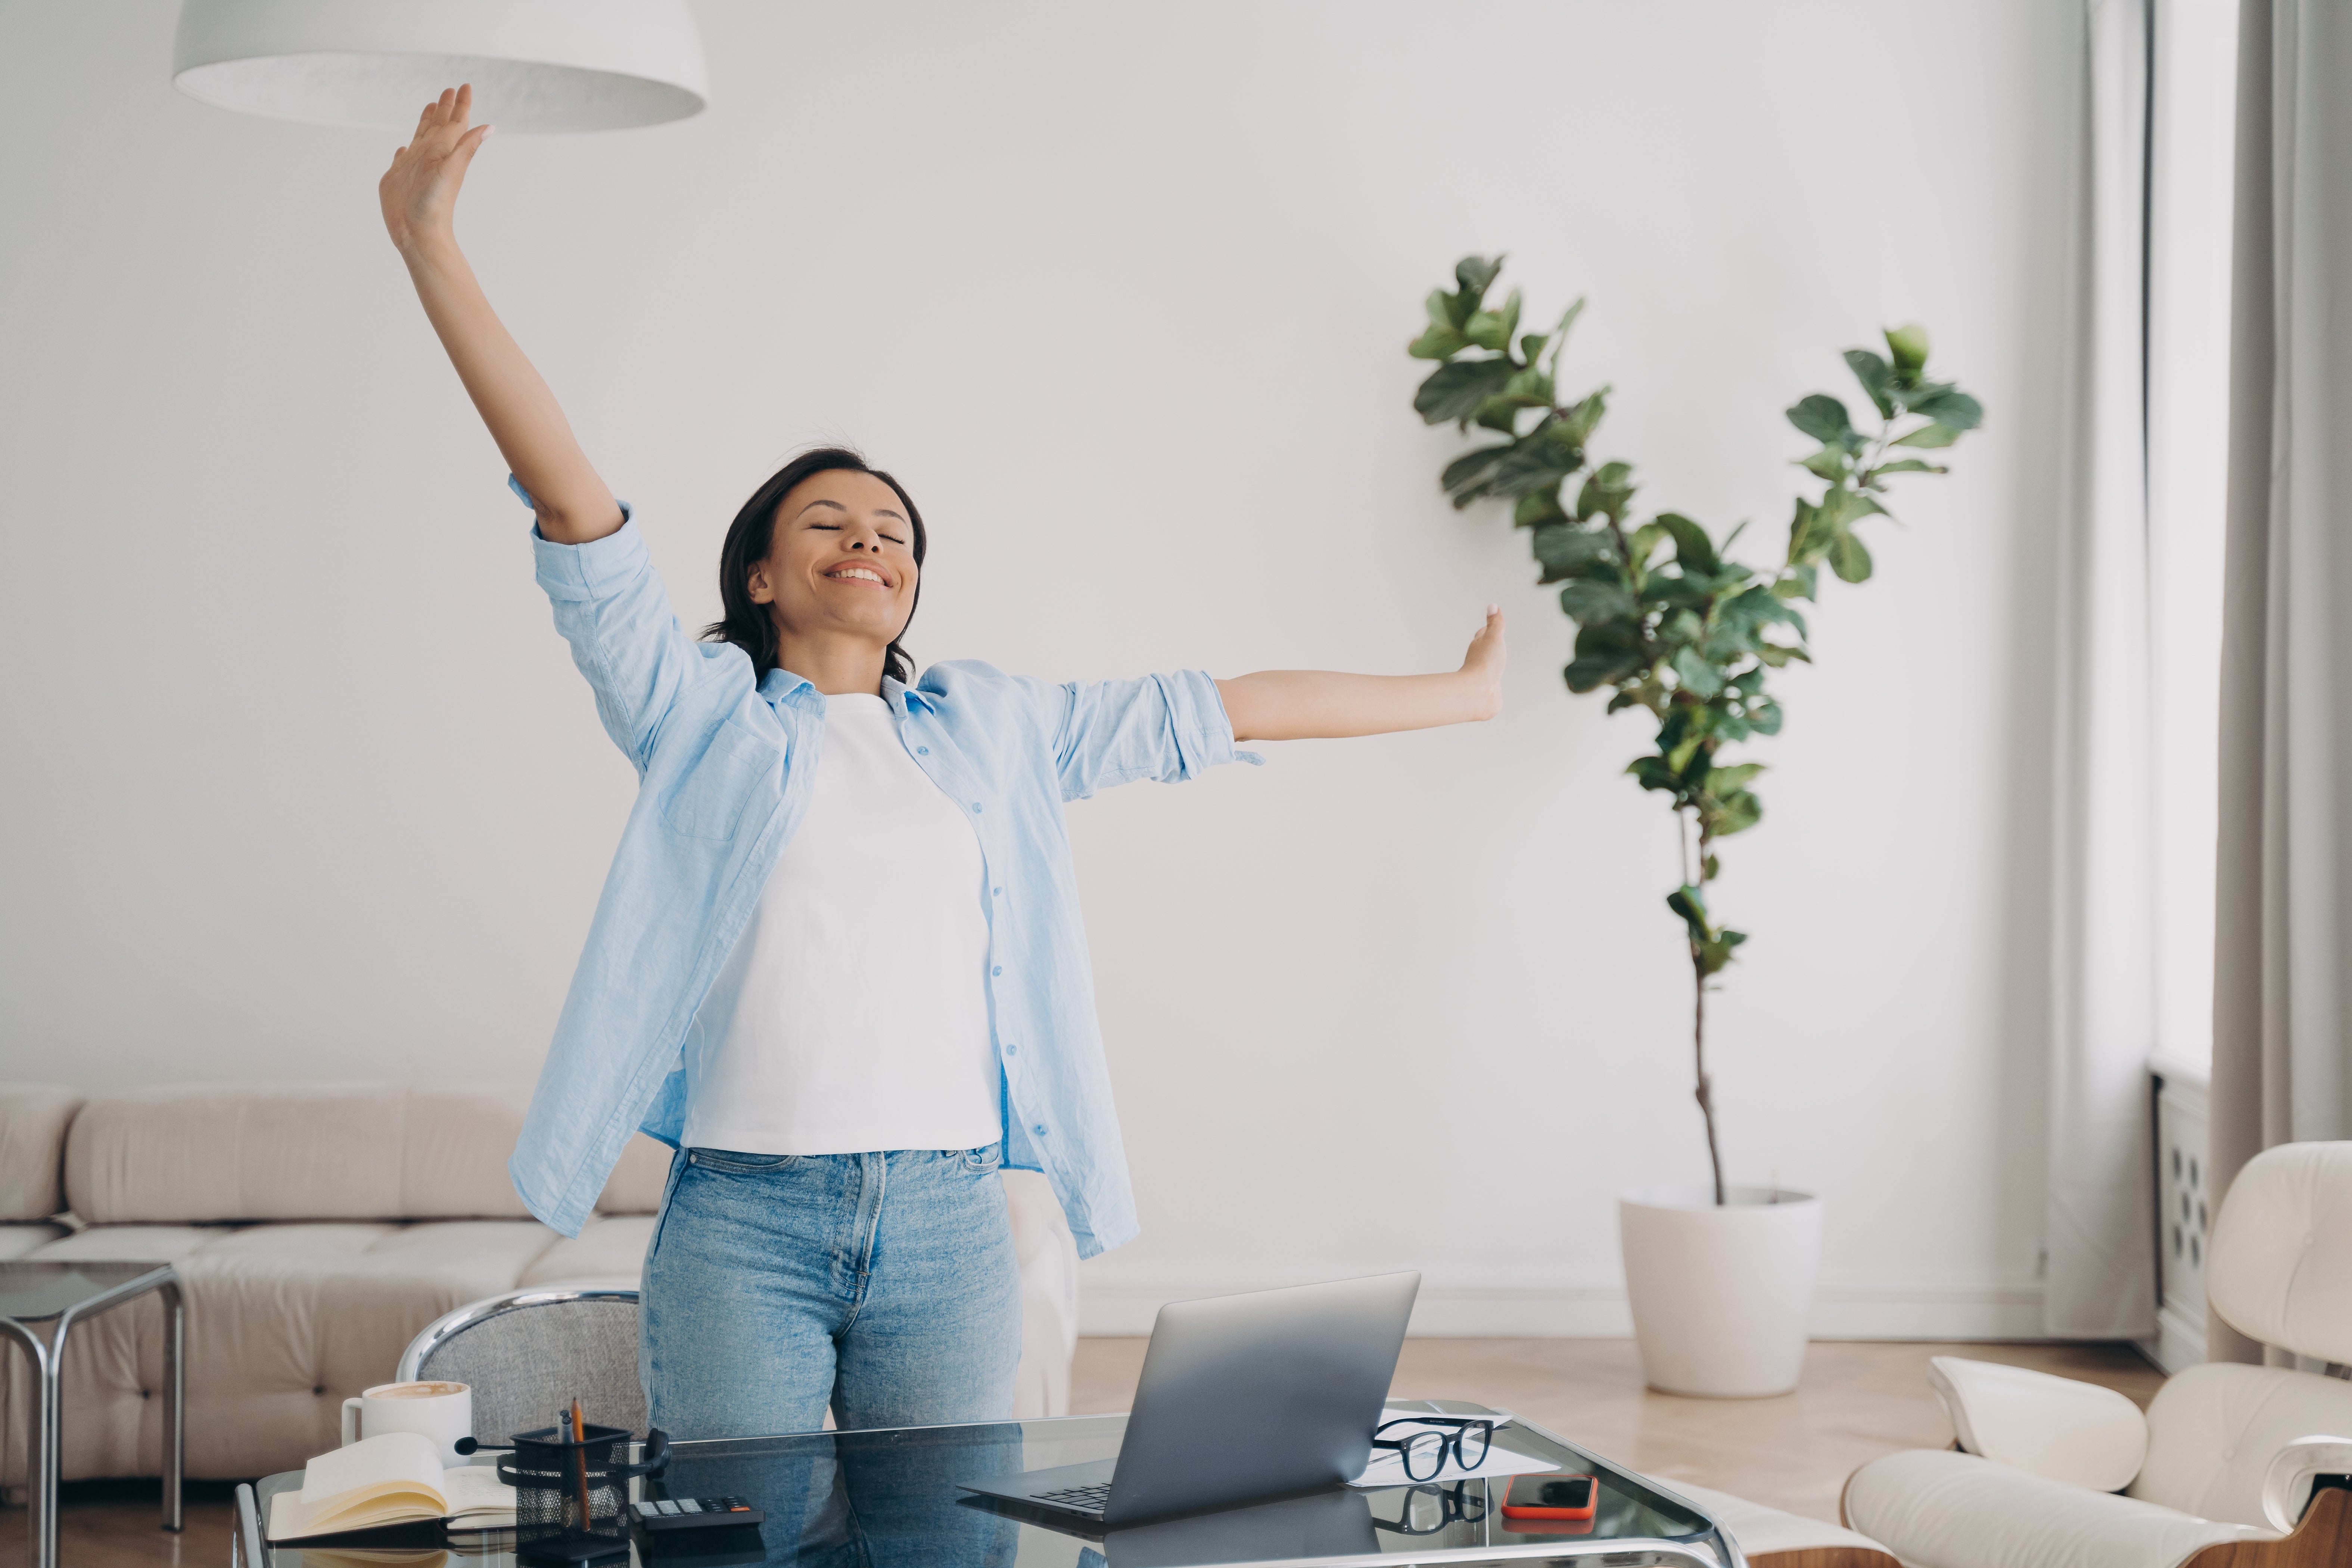 Woman rejoicing that the work day is over